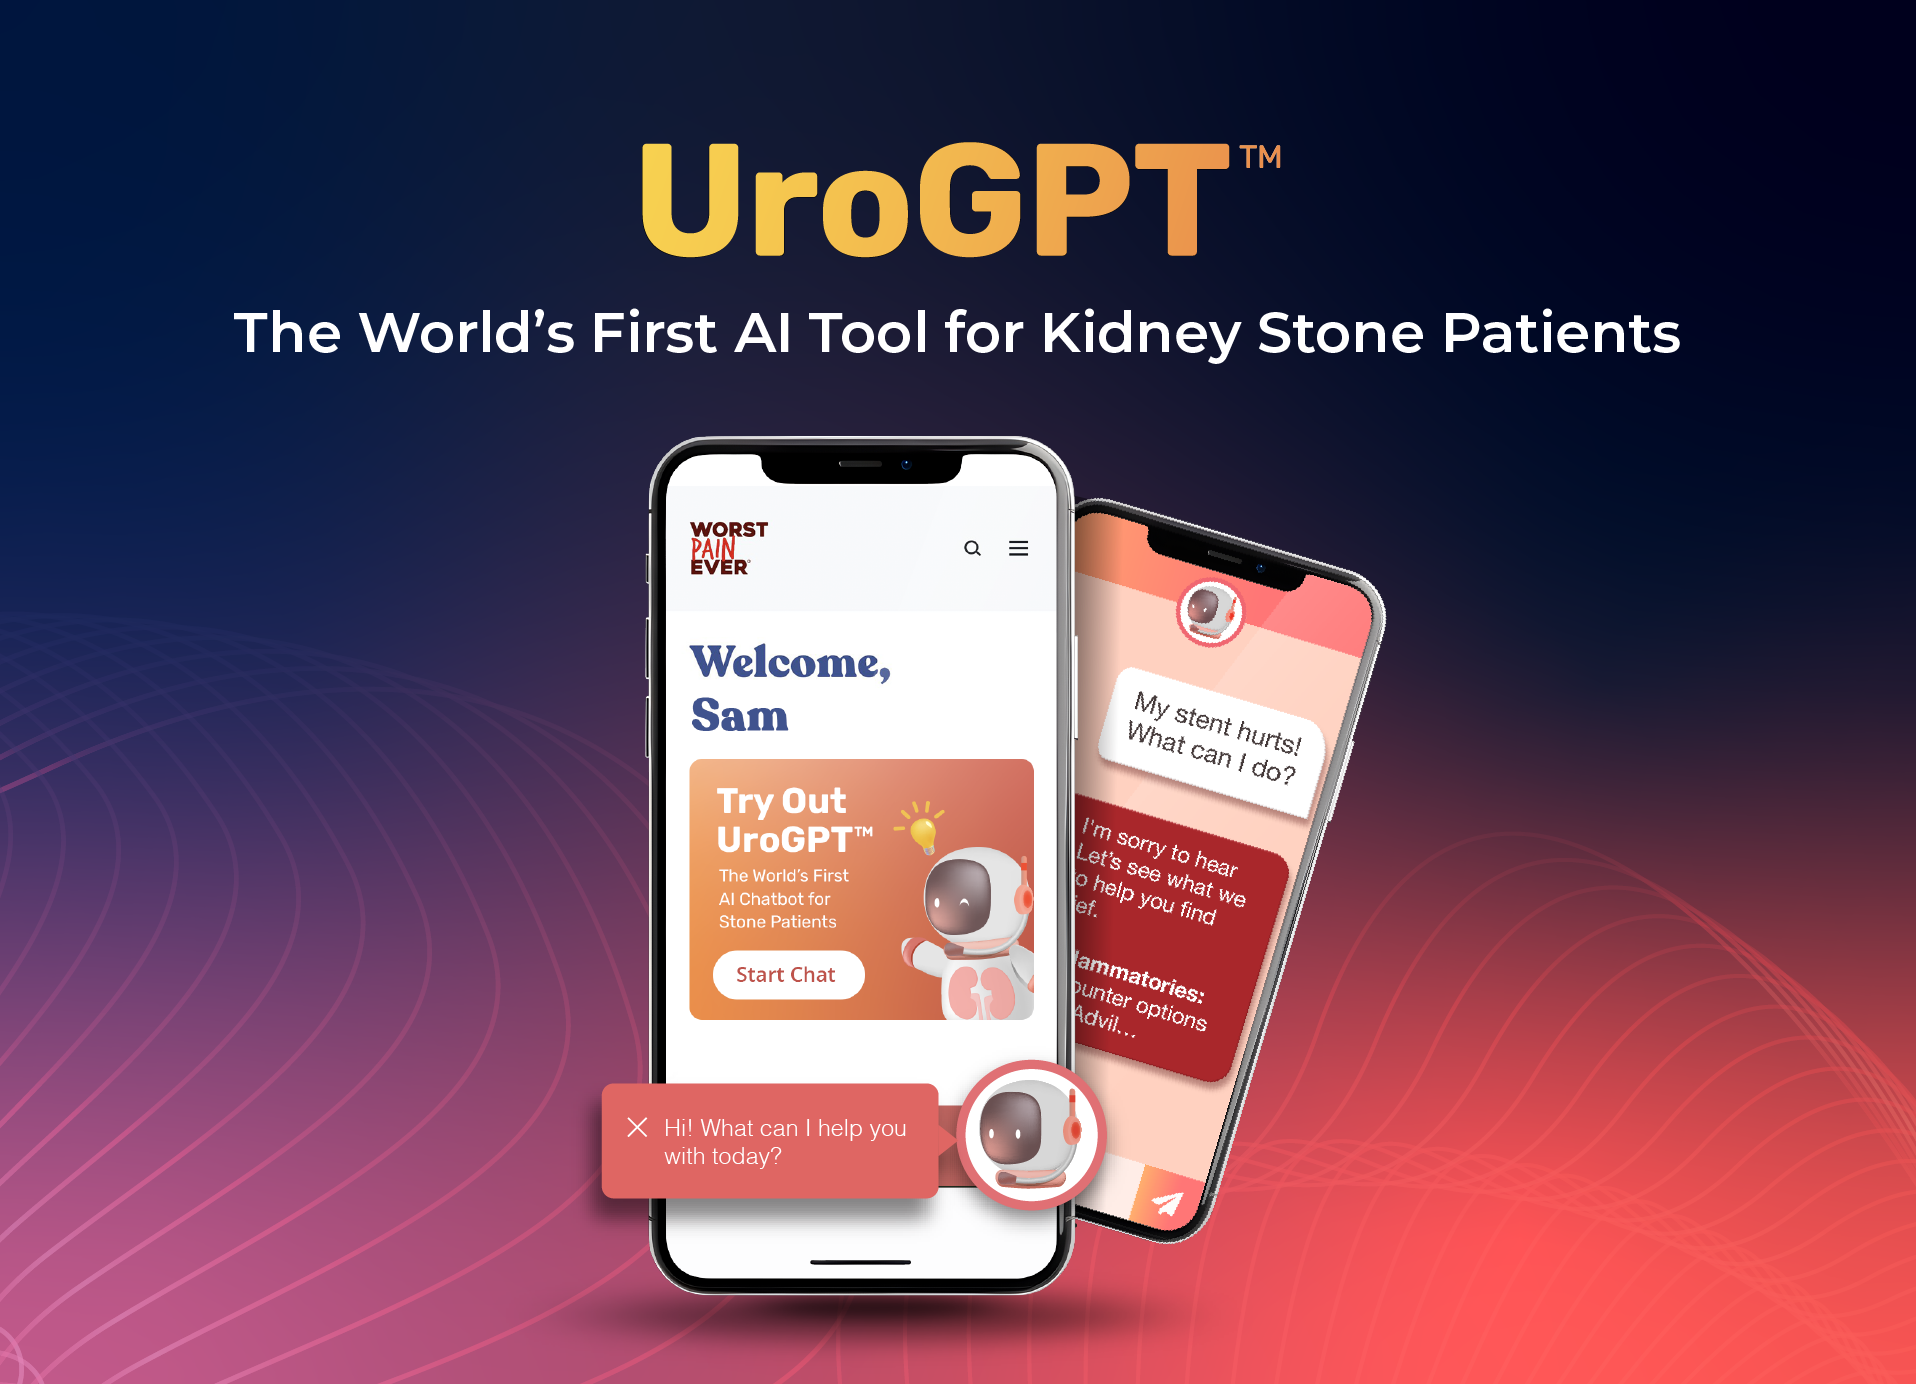 <a href='https://www.dornier.com/it/news/dornier-medtech-launches-urogpt-the-worlds-first-ai-tool-dedicated-to-kidney-stone-patients/'></noscript>Dornier MedTech Launches UroGPT™: The World’s First AI Tool Dedicated to Kidney Stone Patients</a>